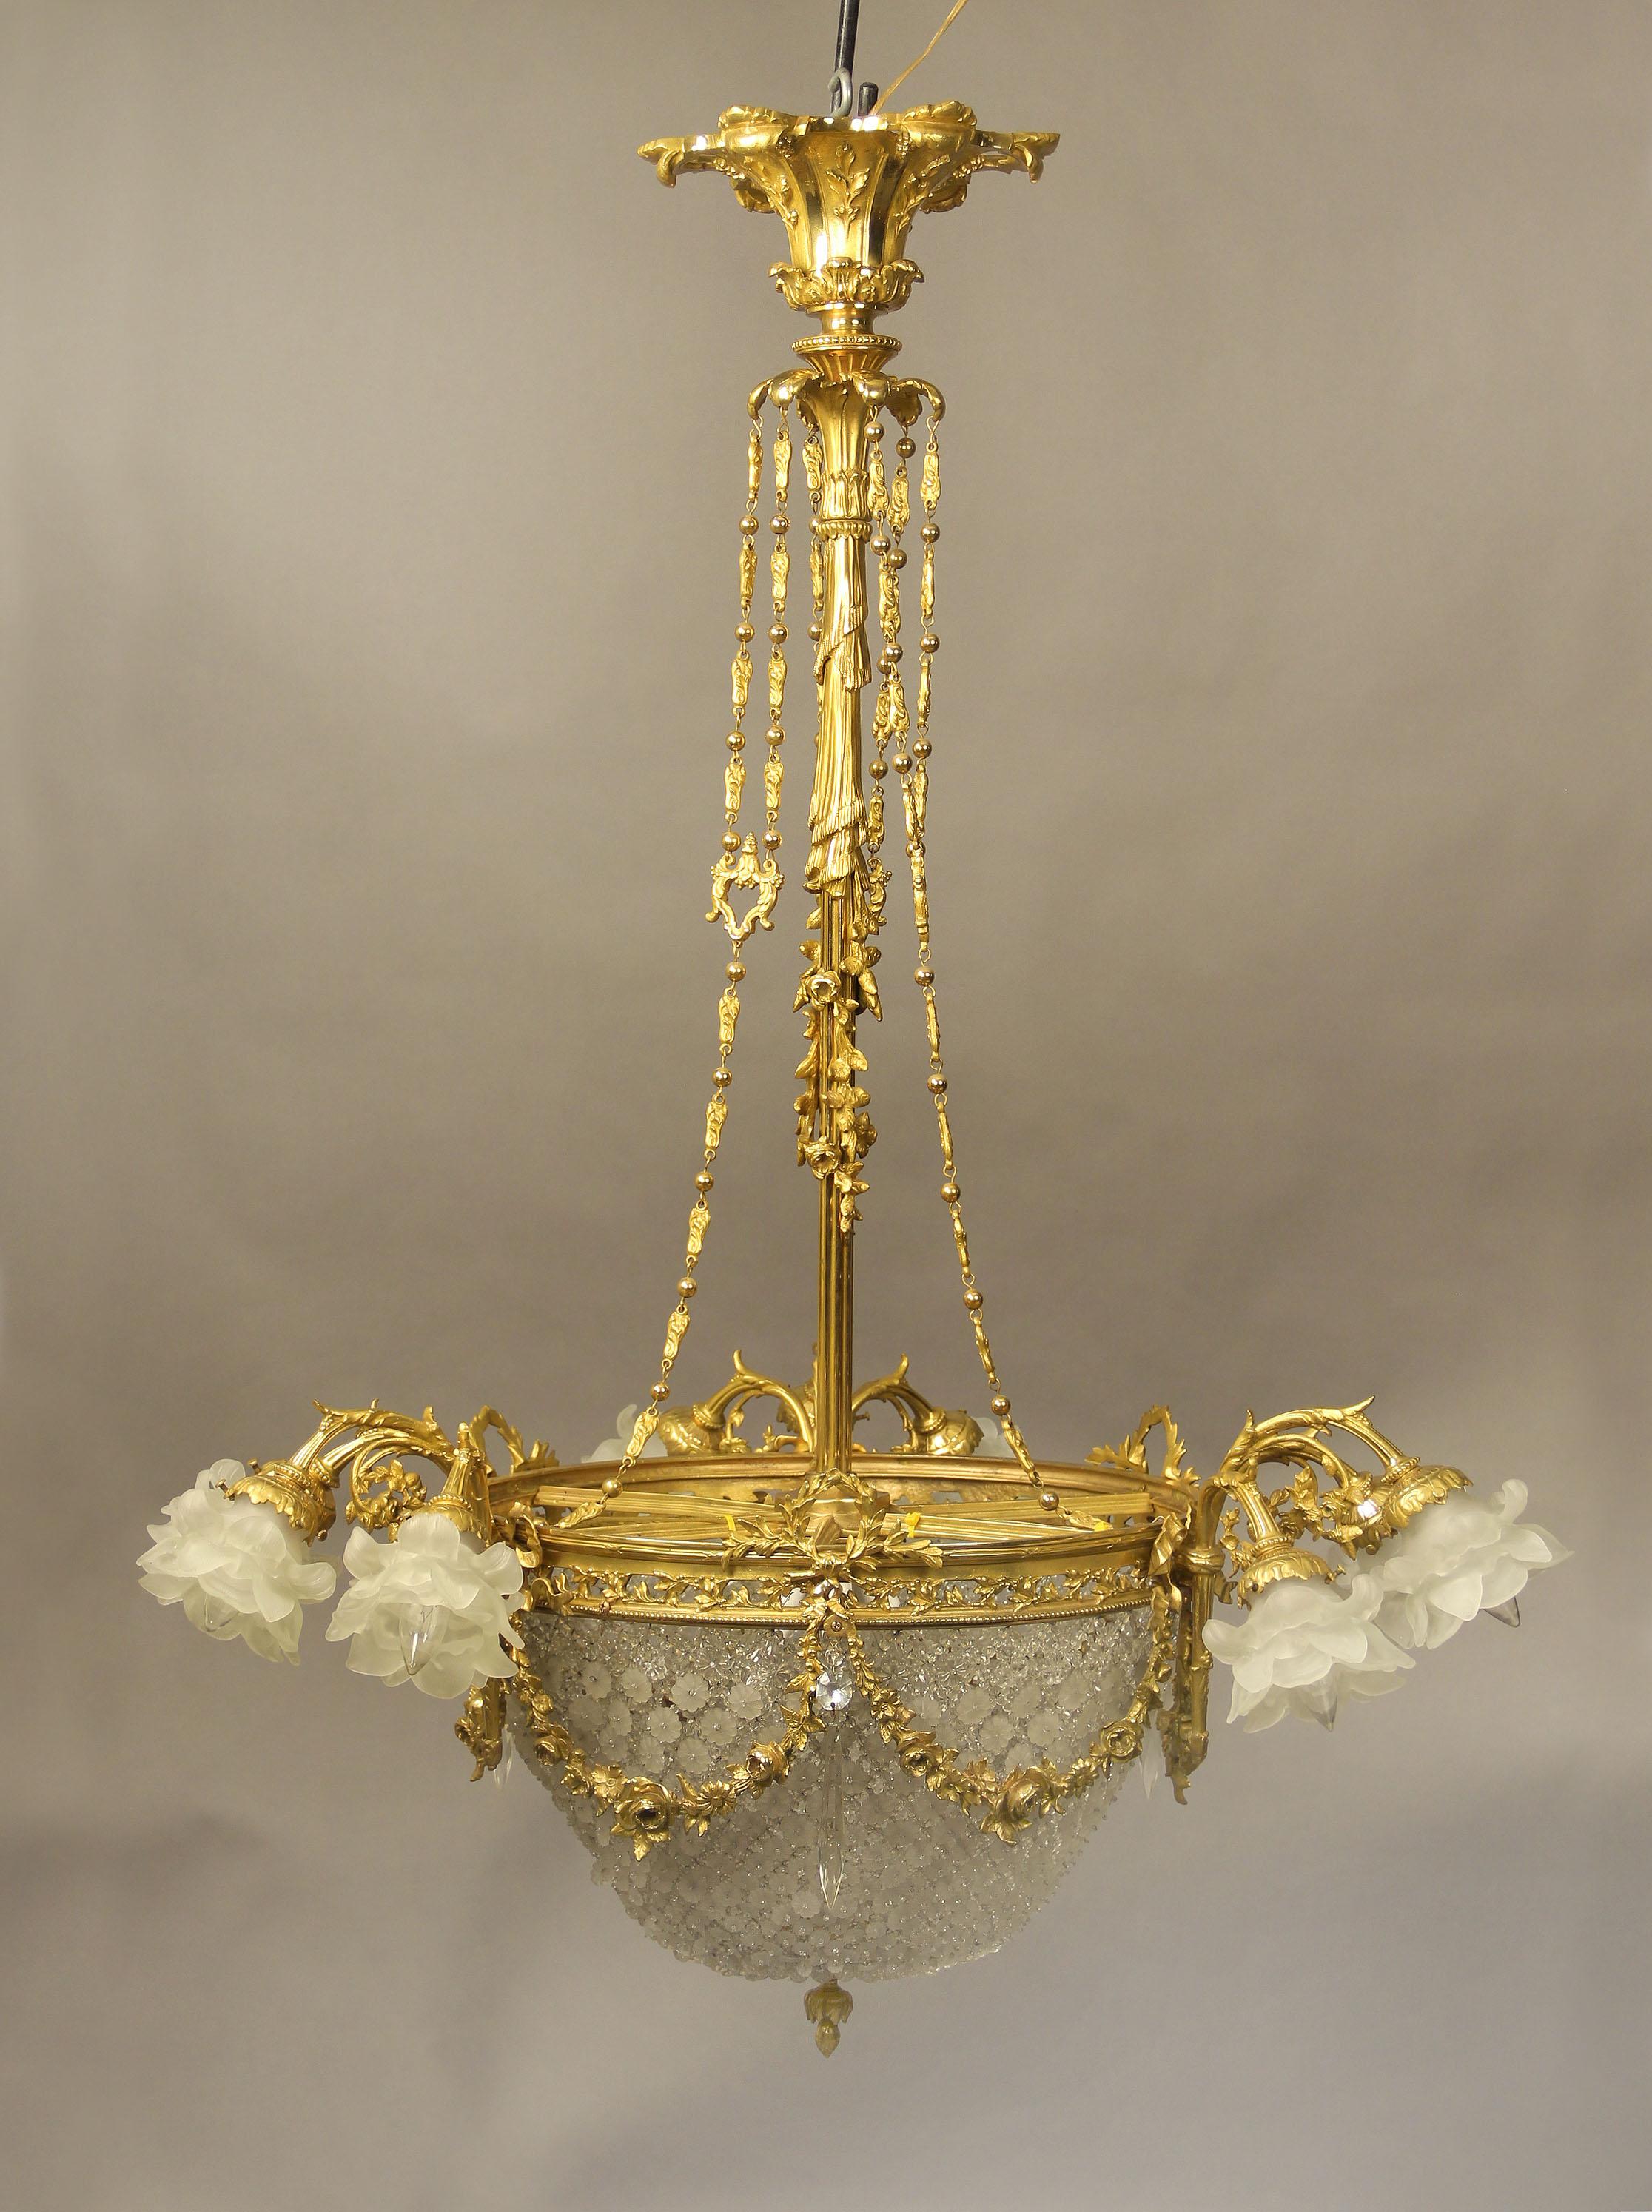 An exceptional late 19th century gilt bronze and crystal fourteen light basket chandelier.

The crown connected to the body by a long, floral and curtain designed stem with three sets of bronze ropes. The crystal basket is mounted by flower and